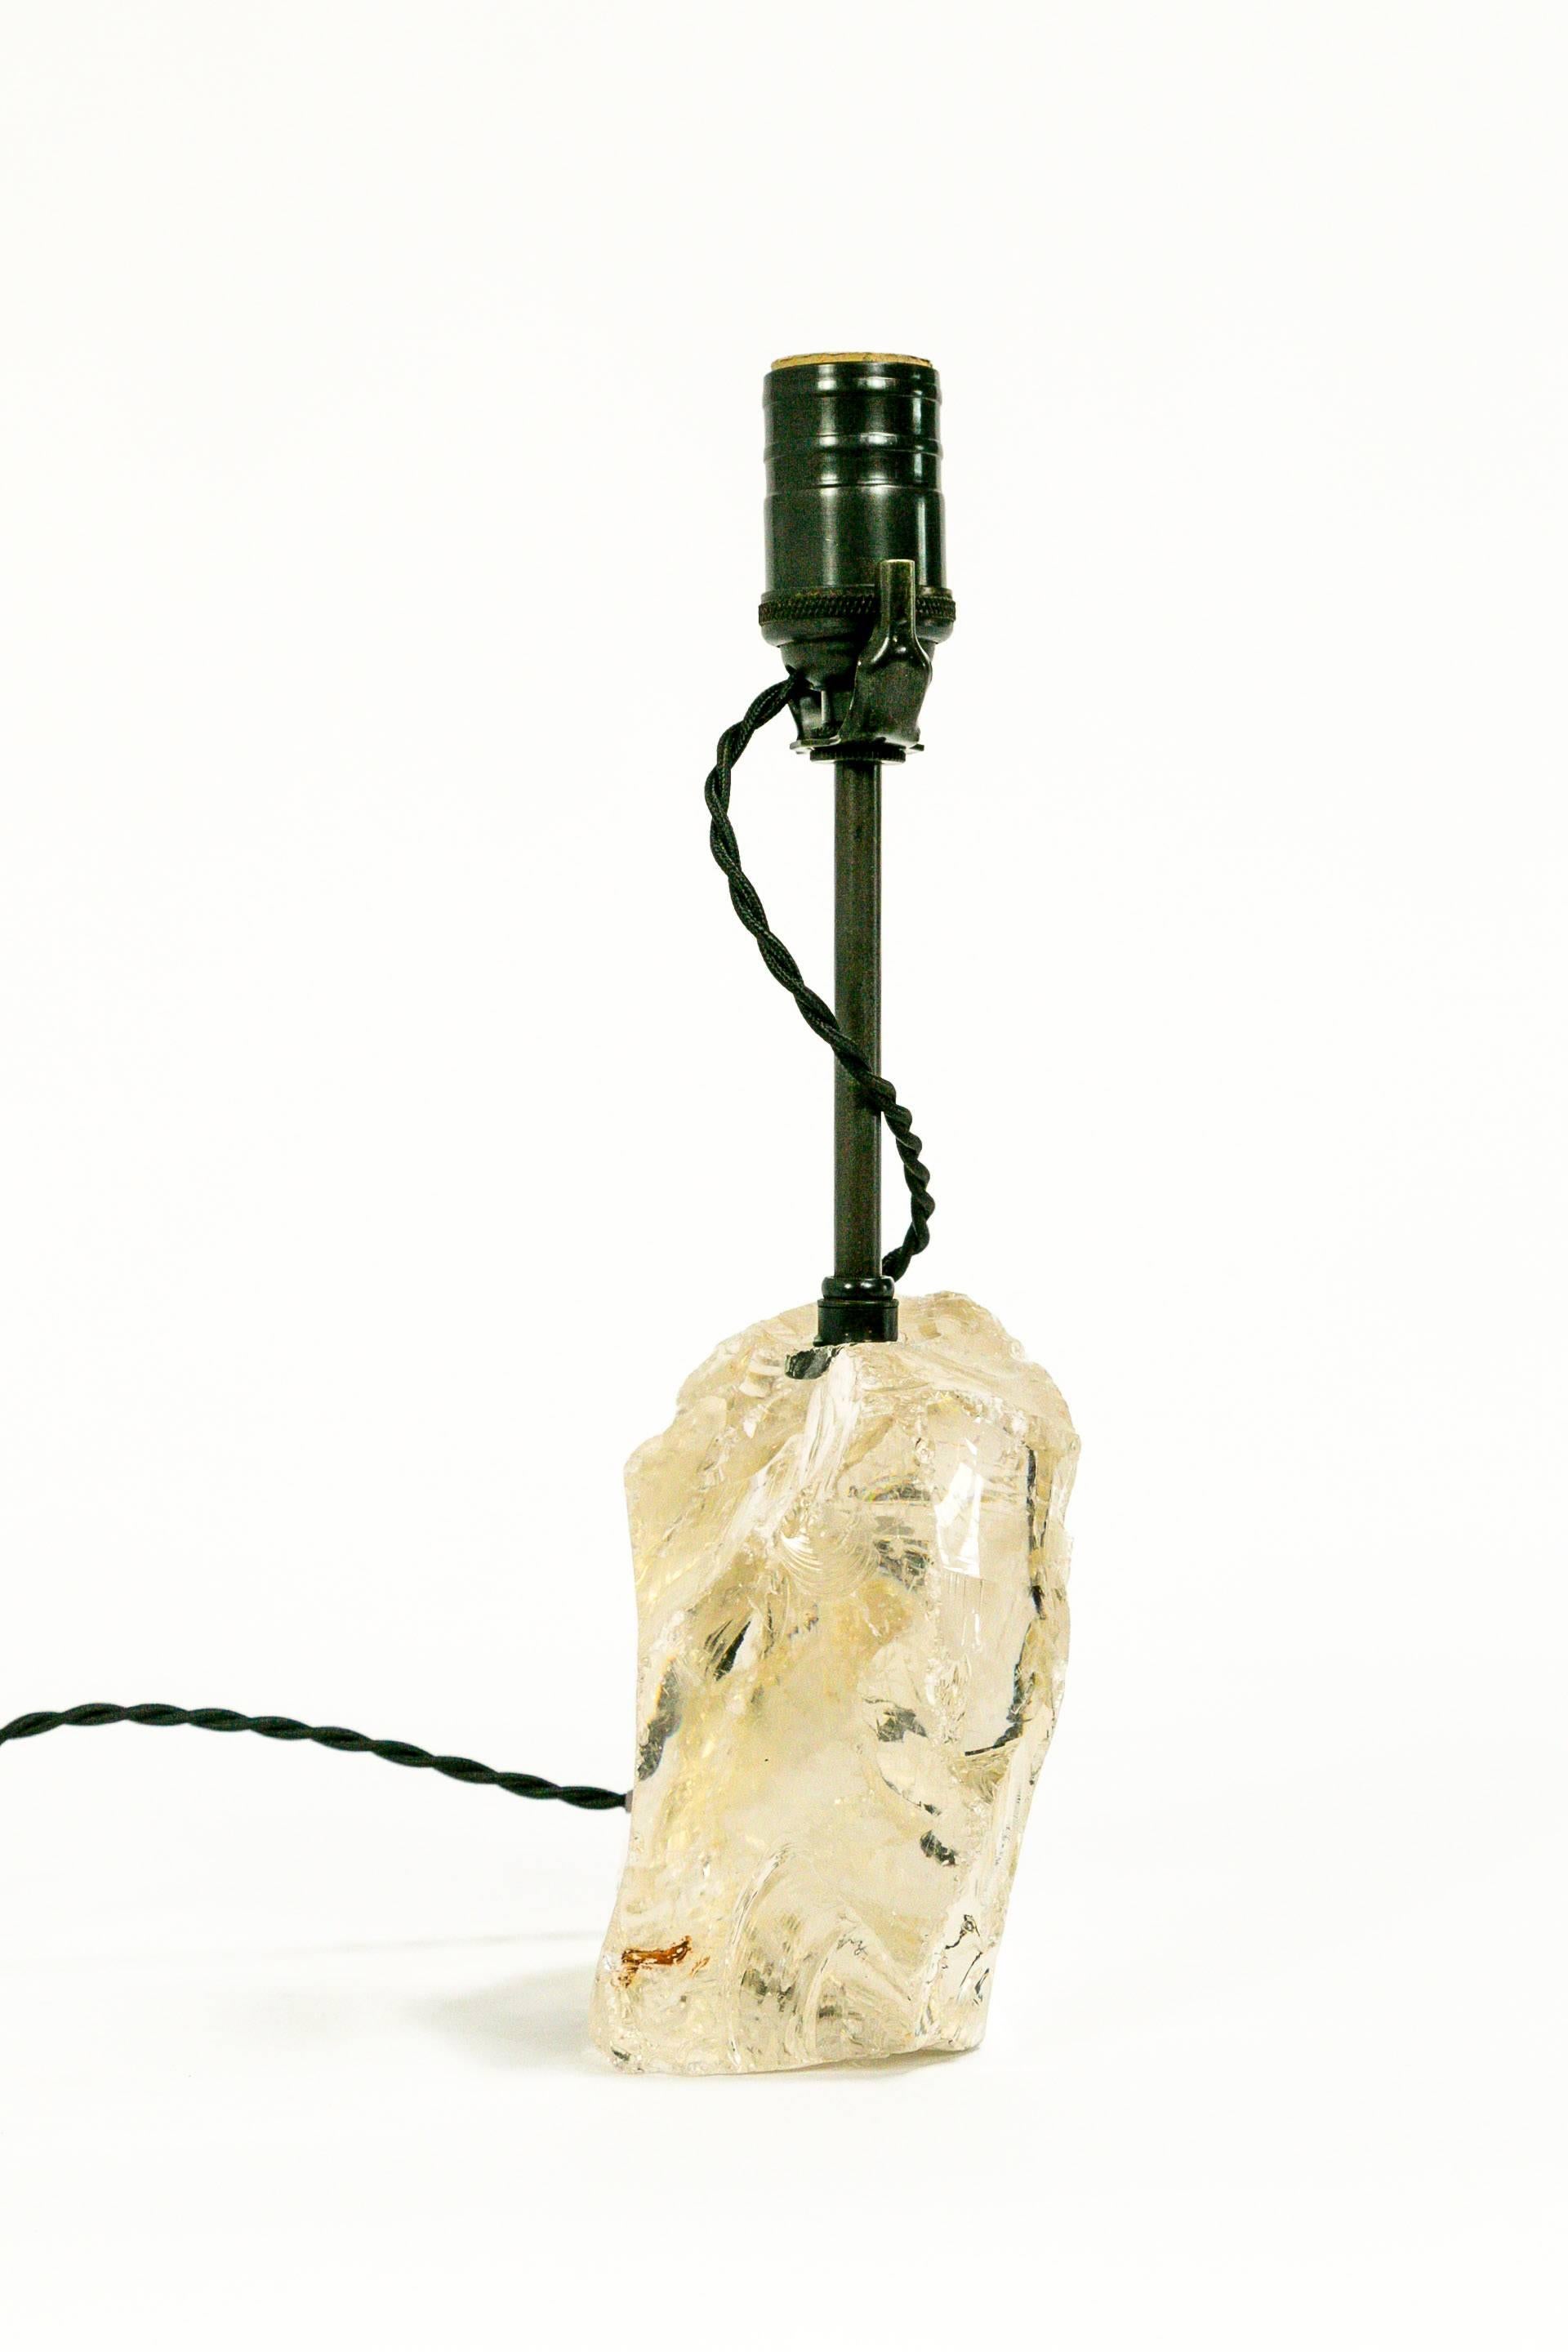 We fabricated this gorgeous, gemstone-like, warm toned, crystal clear, annealed cullet glass into a French wired table lamp. It's brass parts have an oil rubbed bronze finish, with a twisted, black, rayon covered cord with an inline switch. Measure: